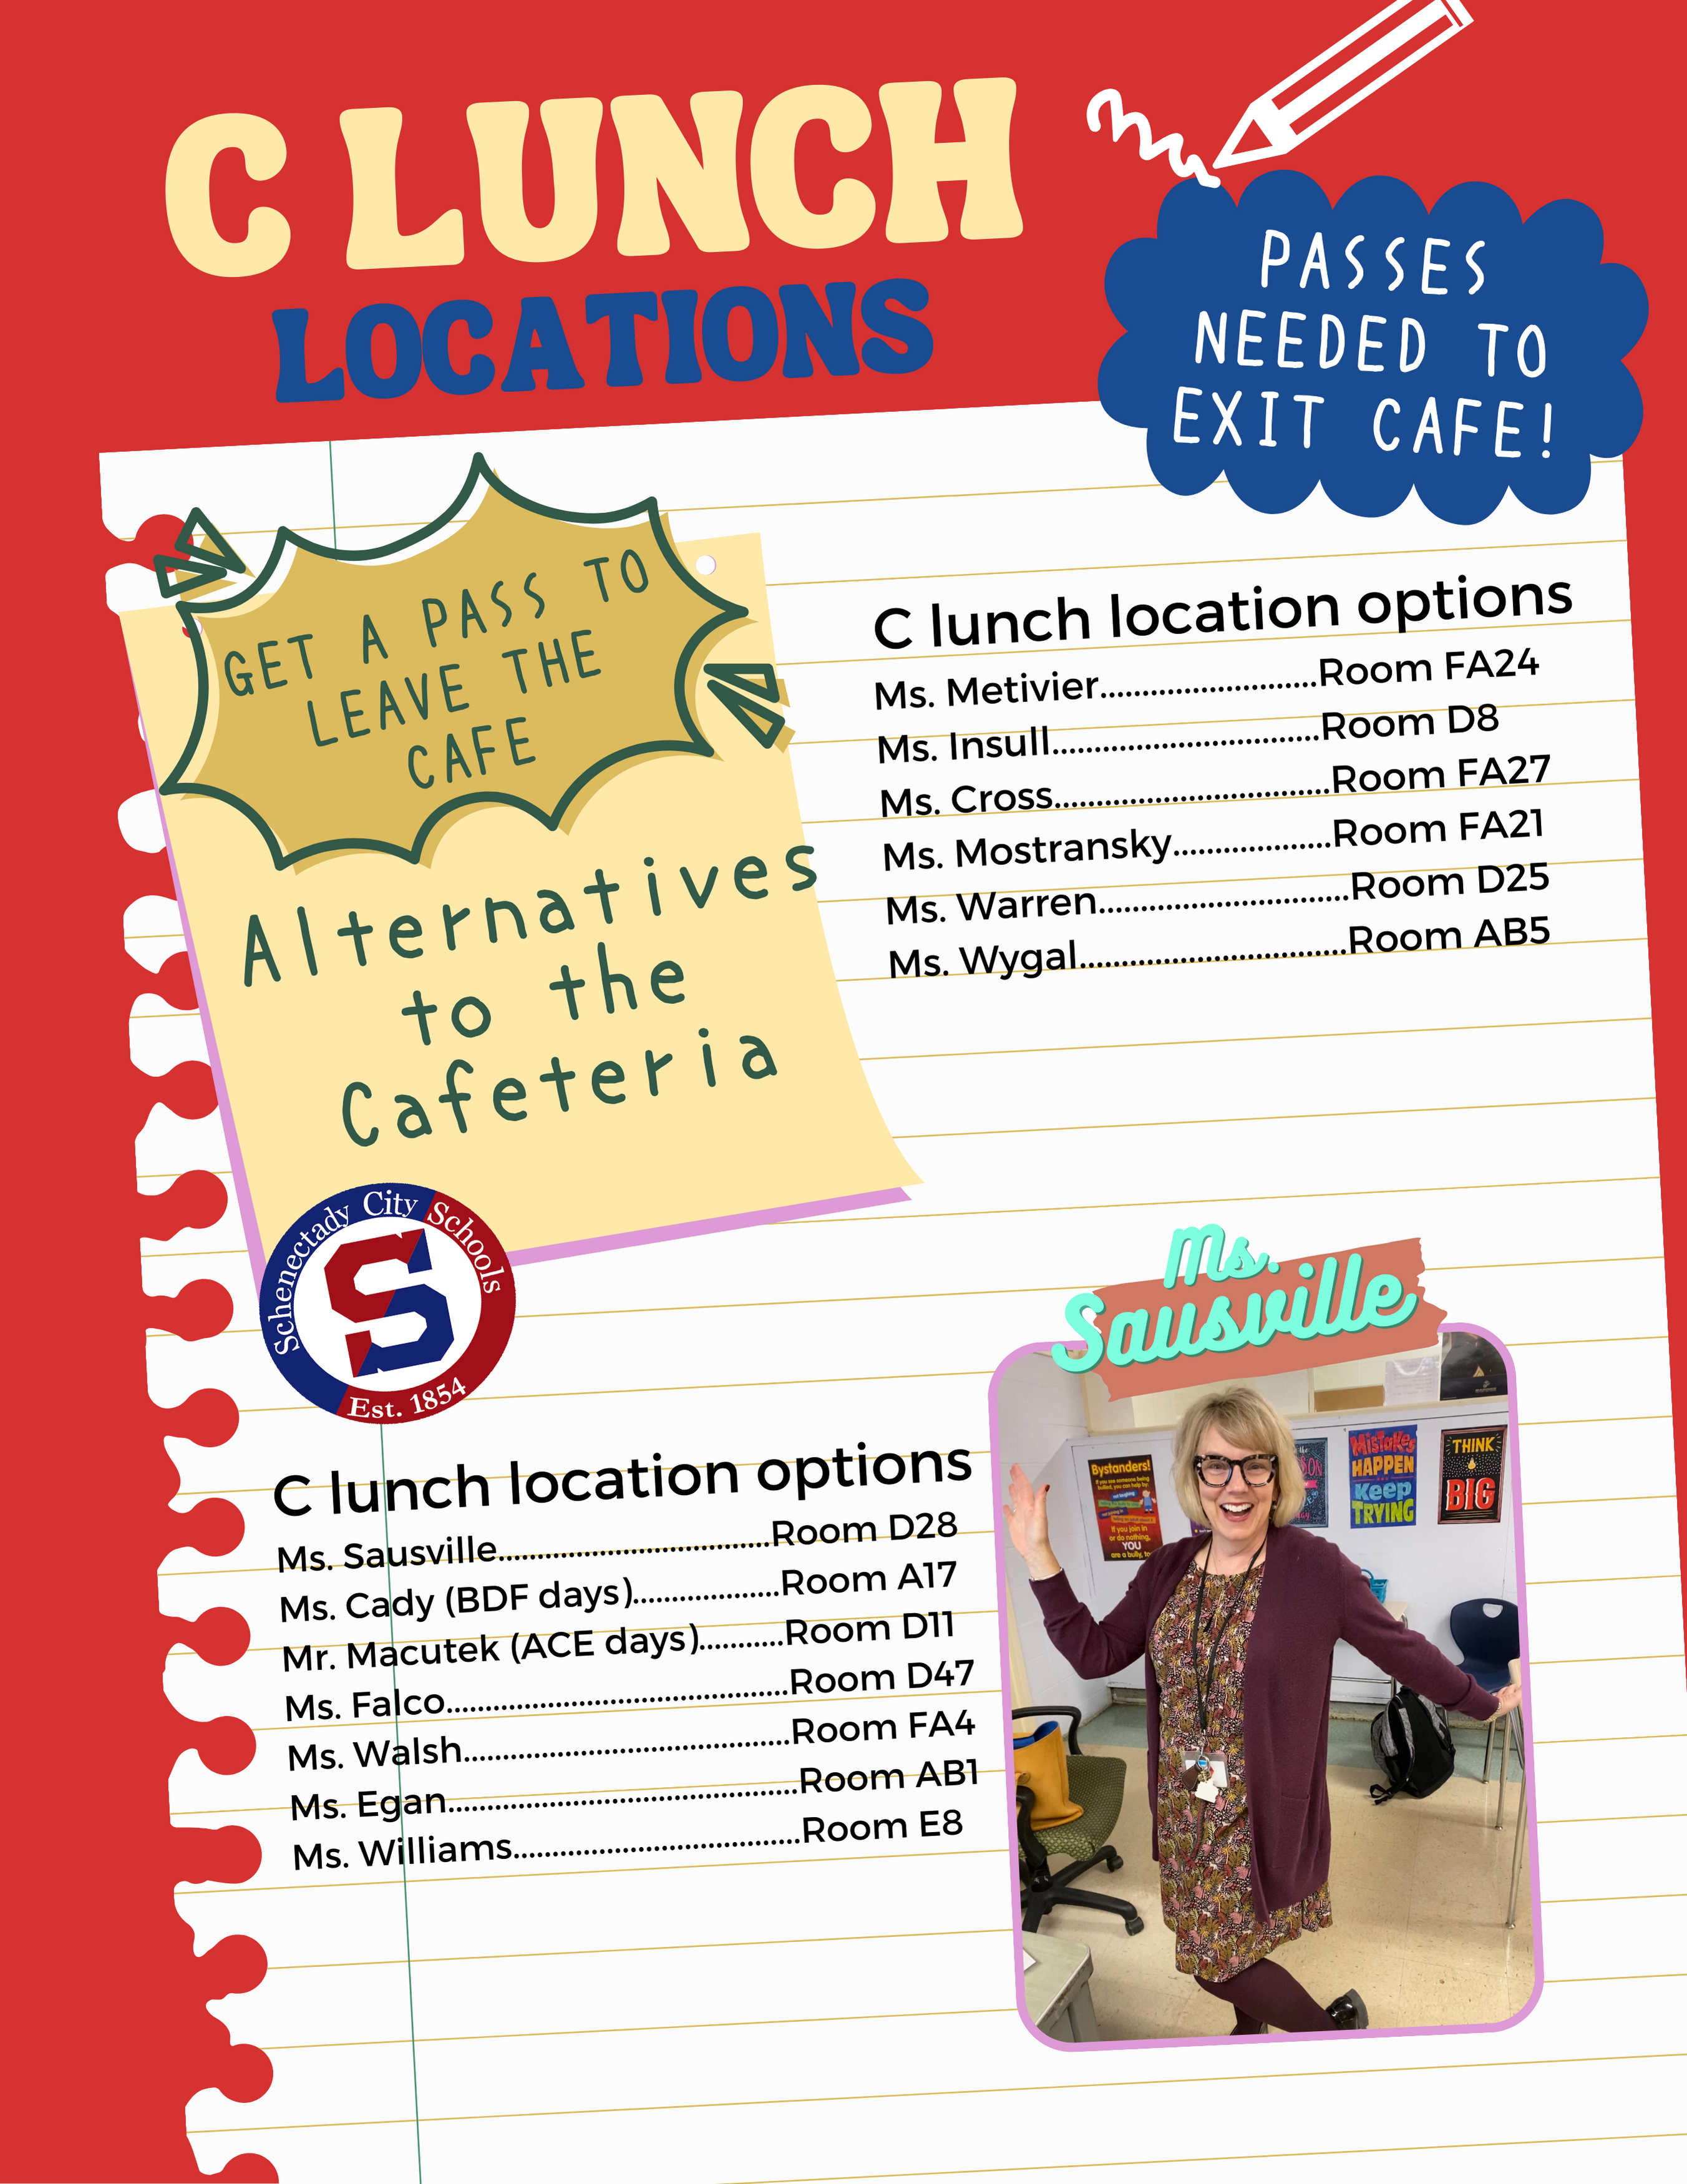 C Lunch locations